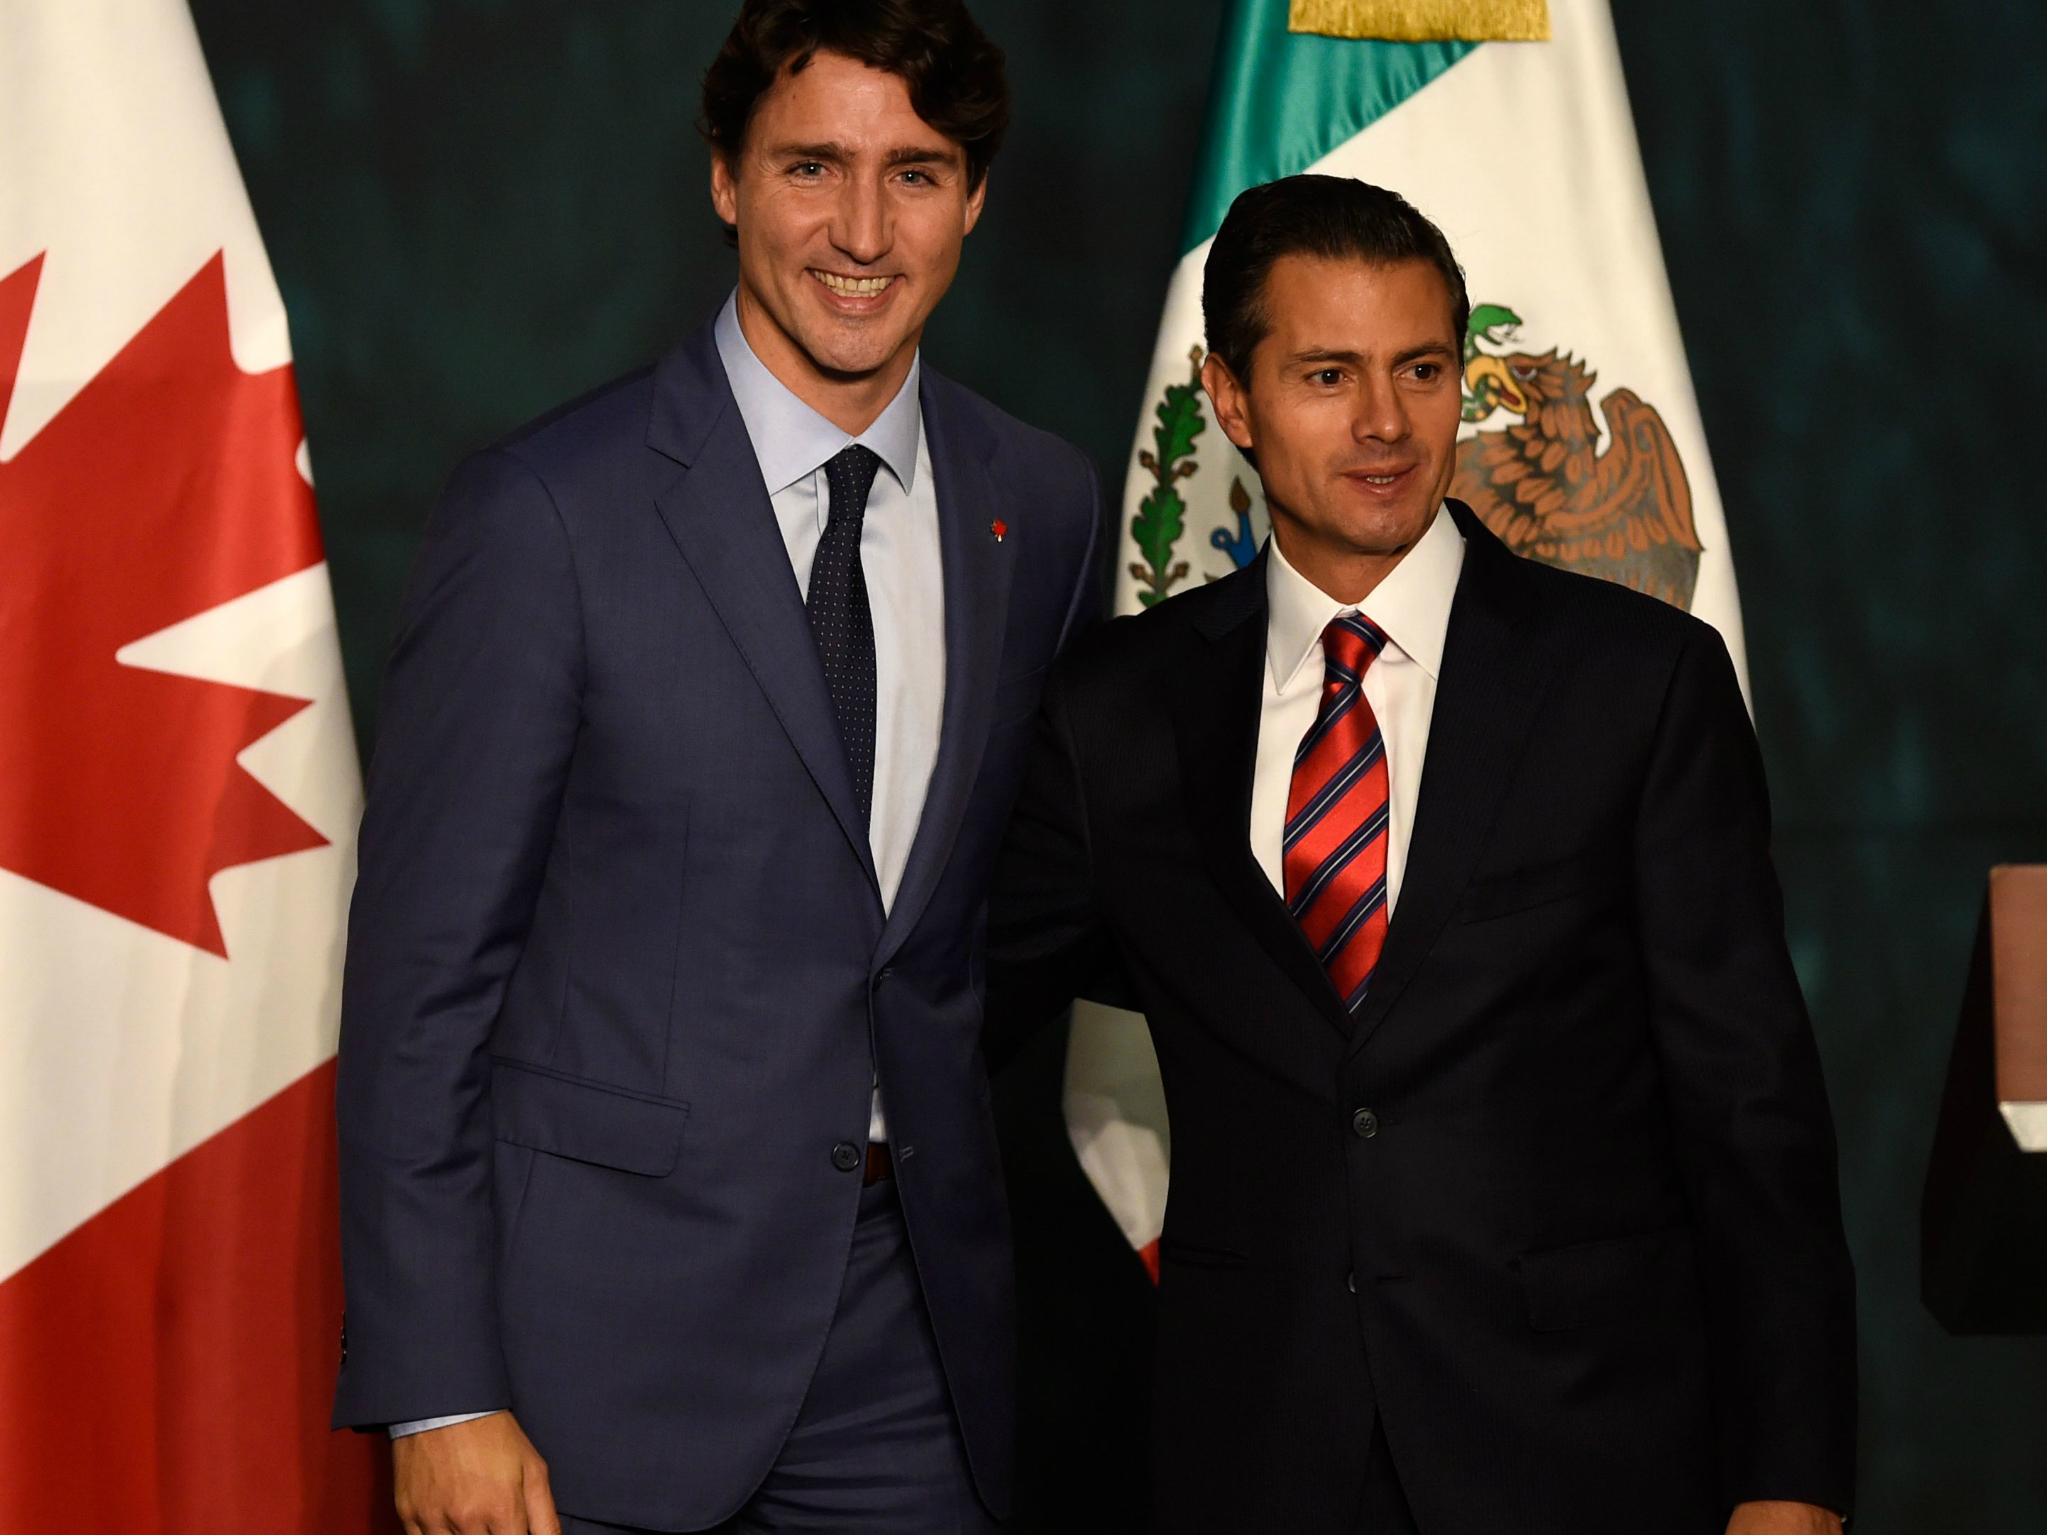 Canada's Prime Minister Justin Trudeau (L) and Mexican President Enrique Pena Nieto pose at the presidential palace in Mexico City on 12 October after discussing Nafta.